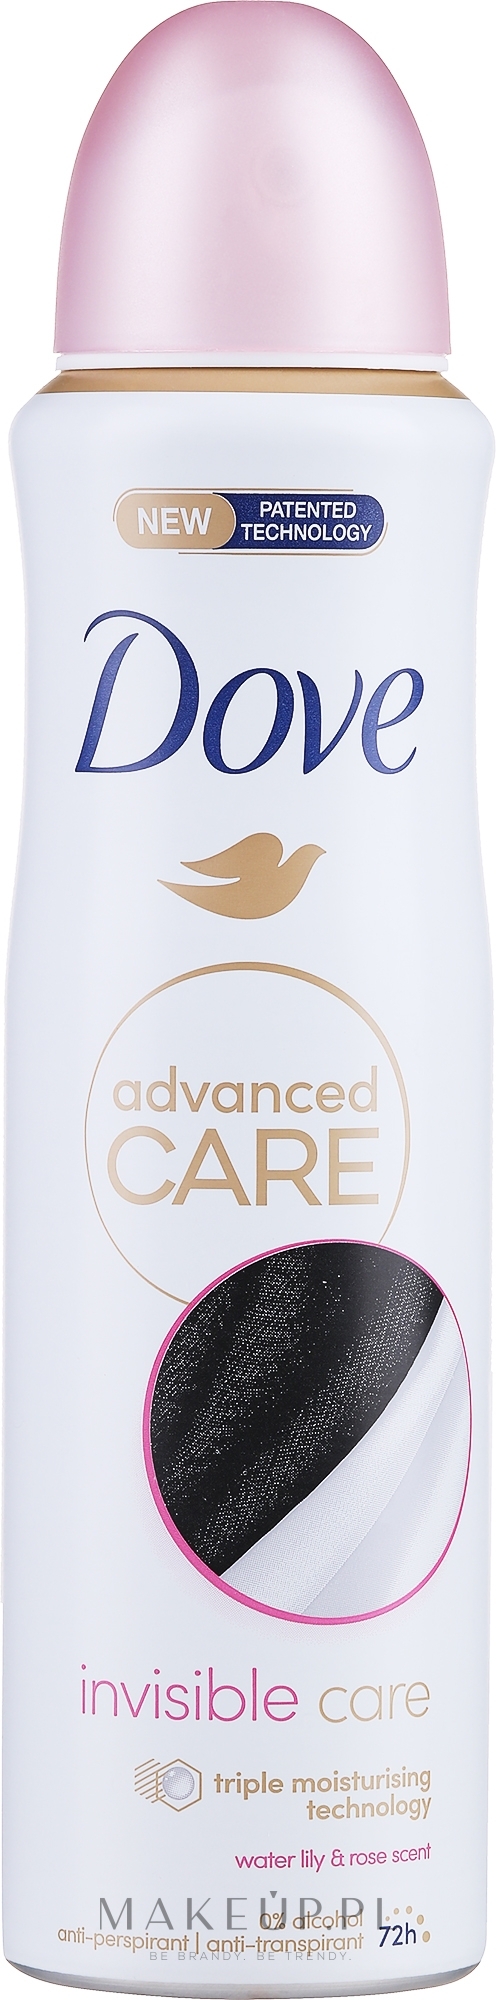 Antyperspirant - Dove Advanced Care Invisible Care Water Lily & Rose Scent Anti-perspirant Spray — Zdjęcie 150 ml